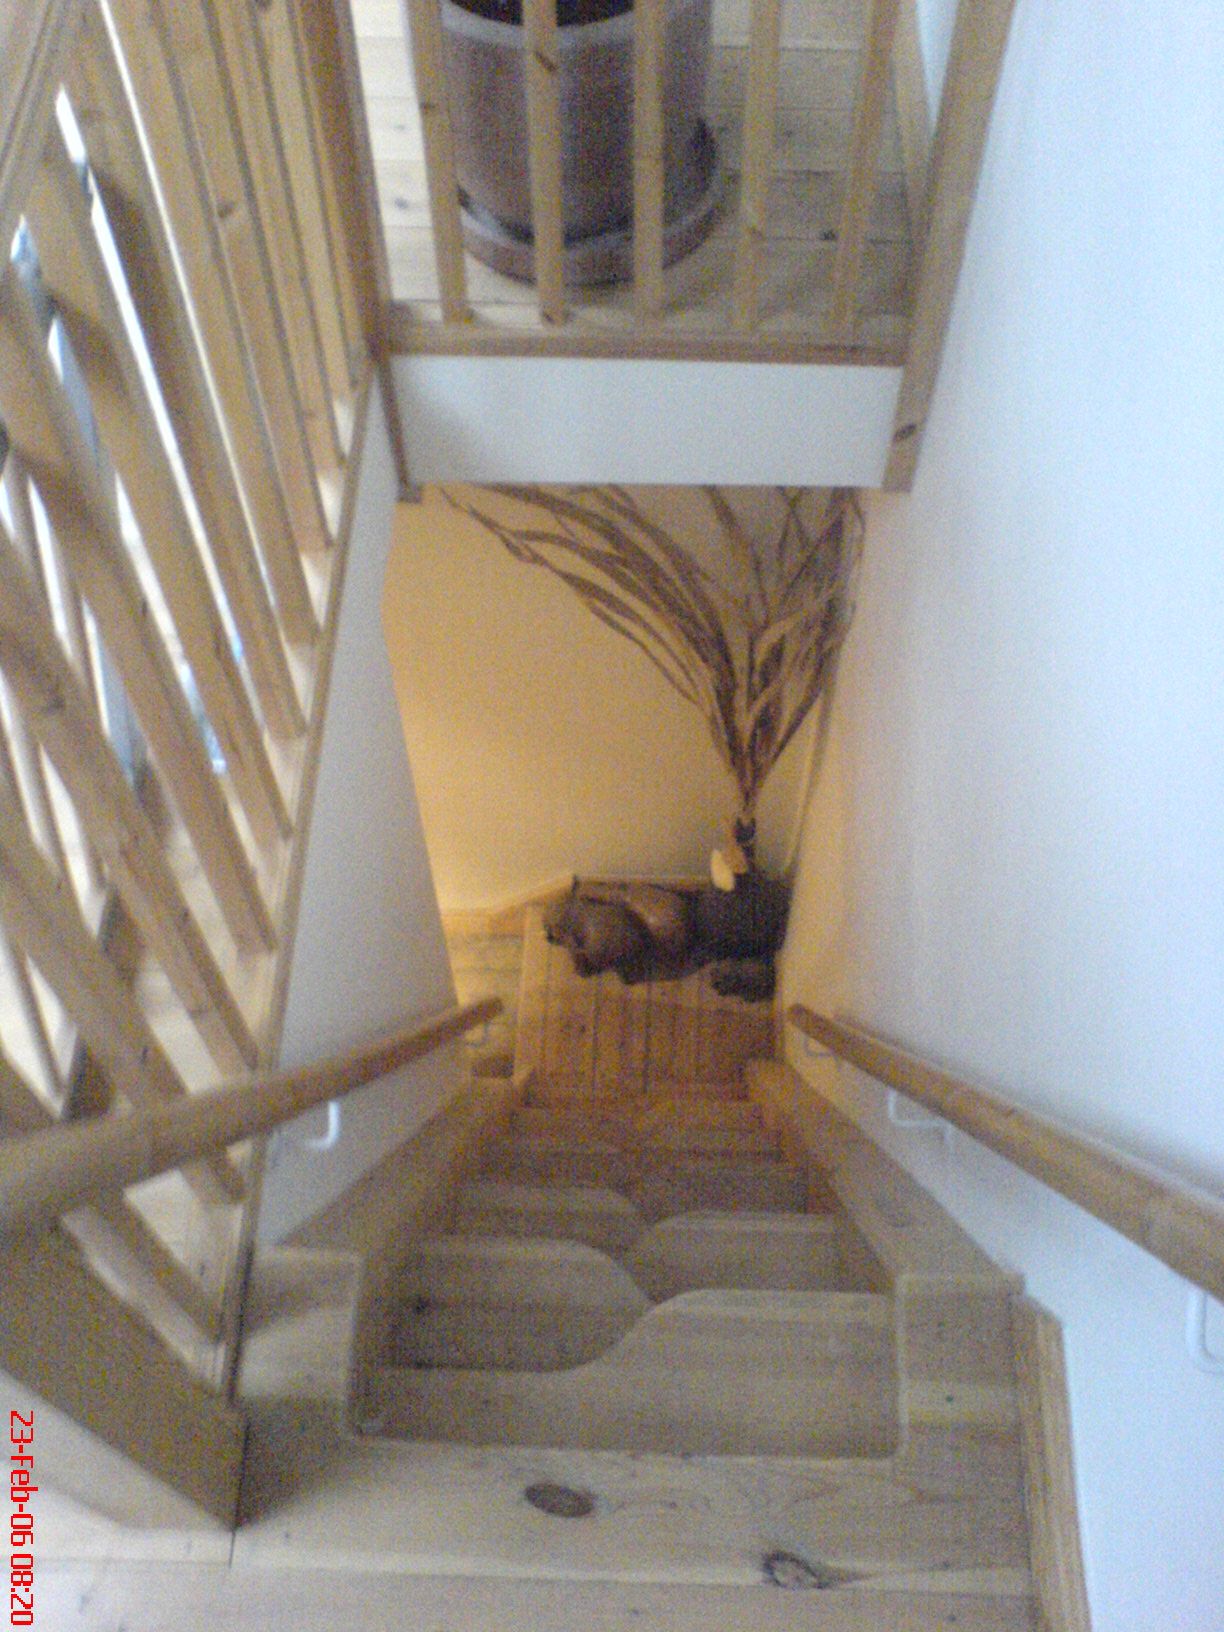 Spacesaving Staircase to Access Loft